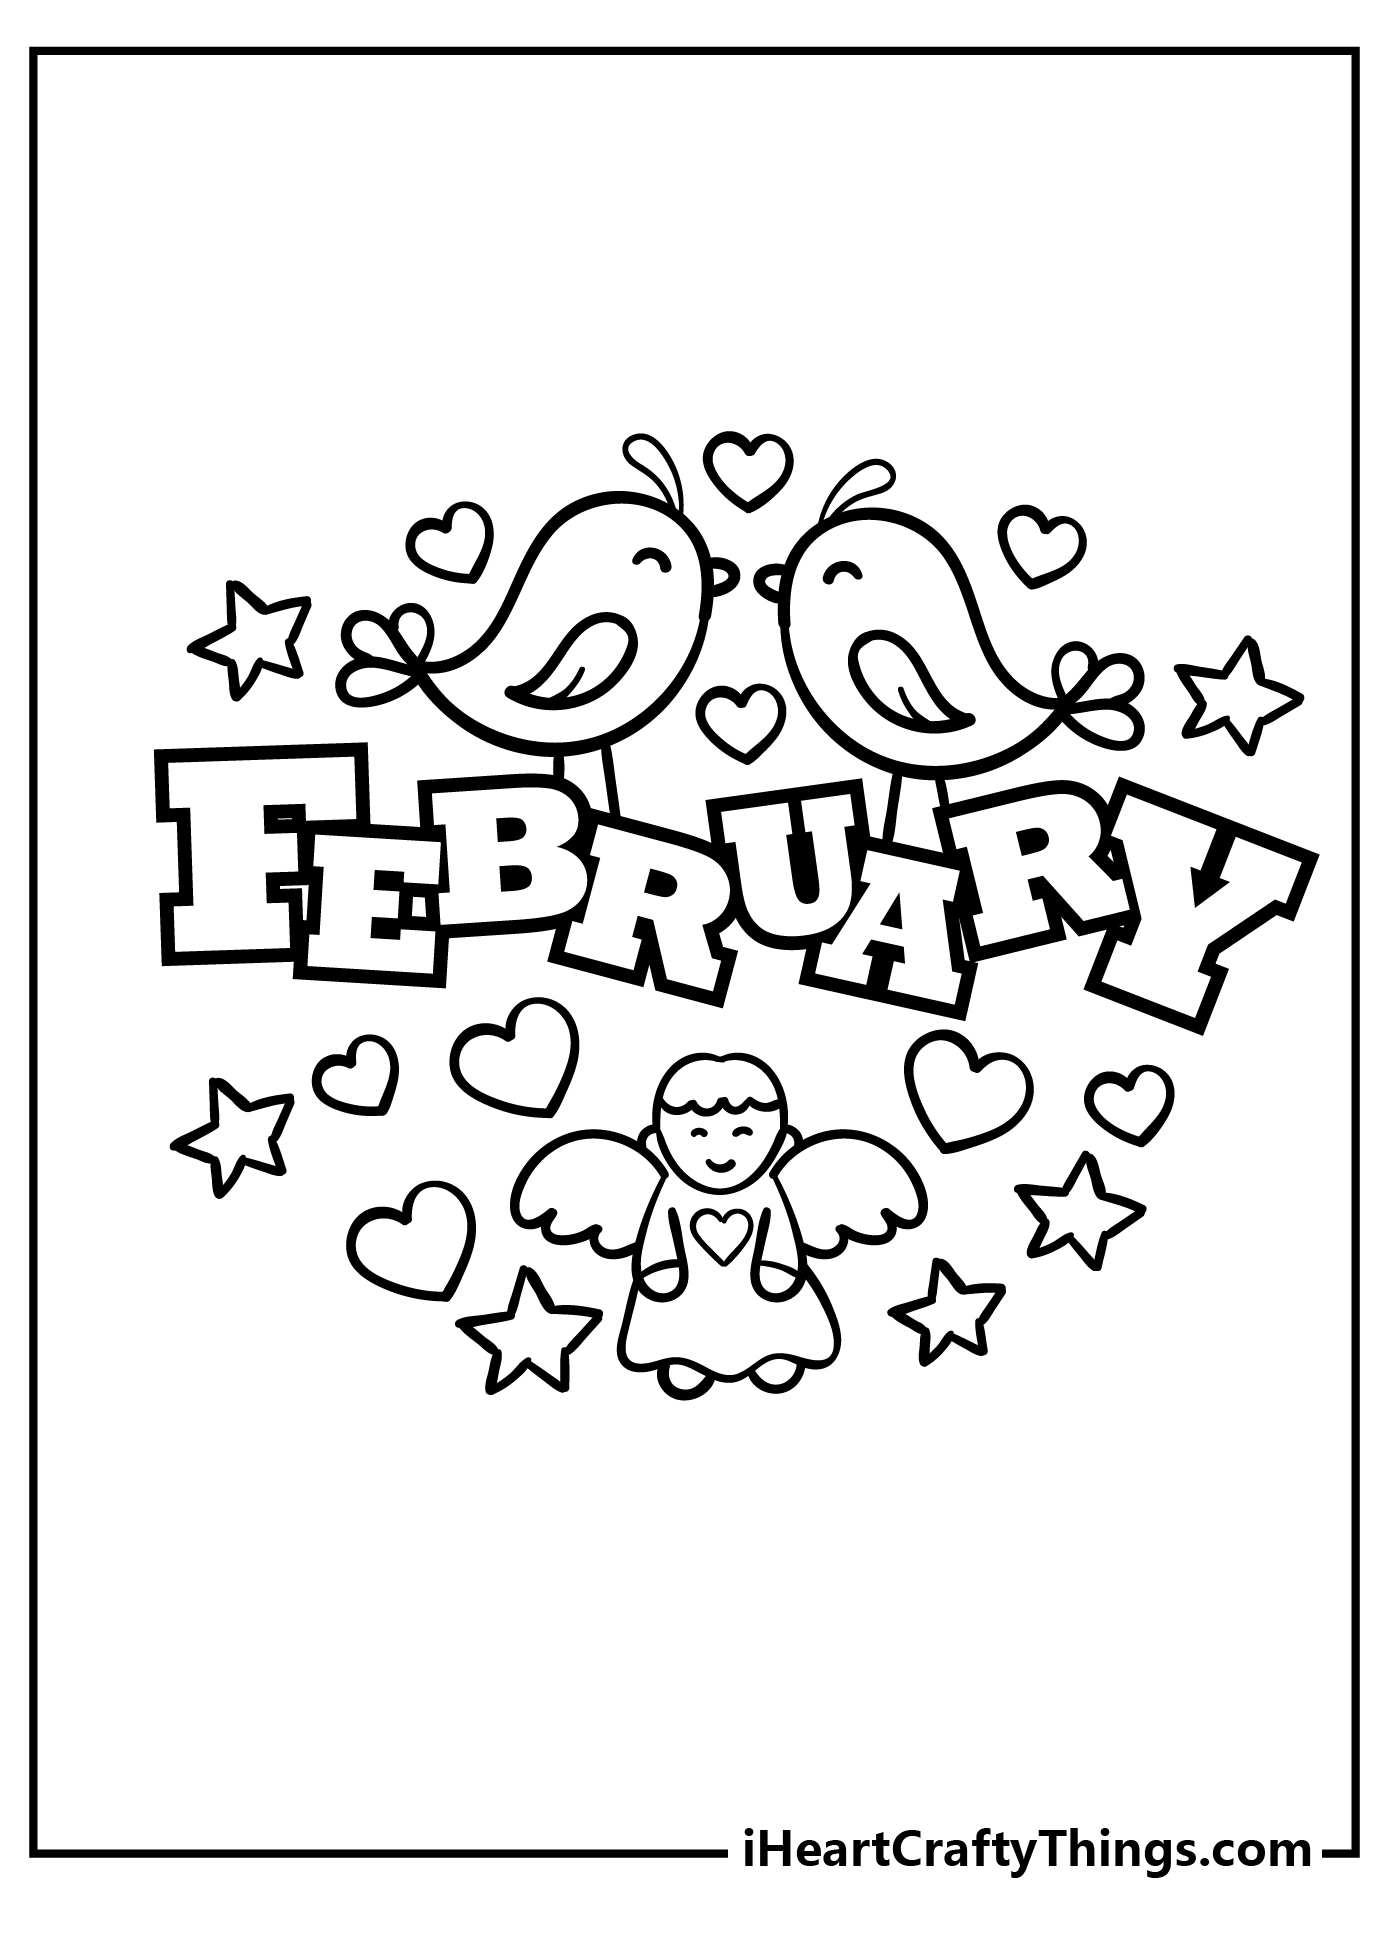 February Coloring Pages for adults free printable